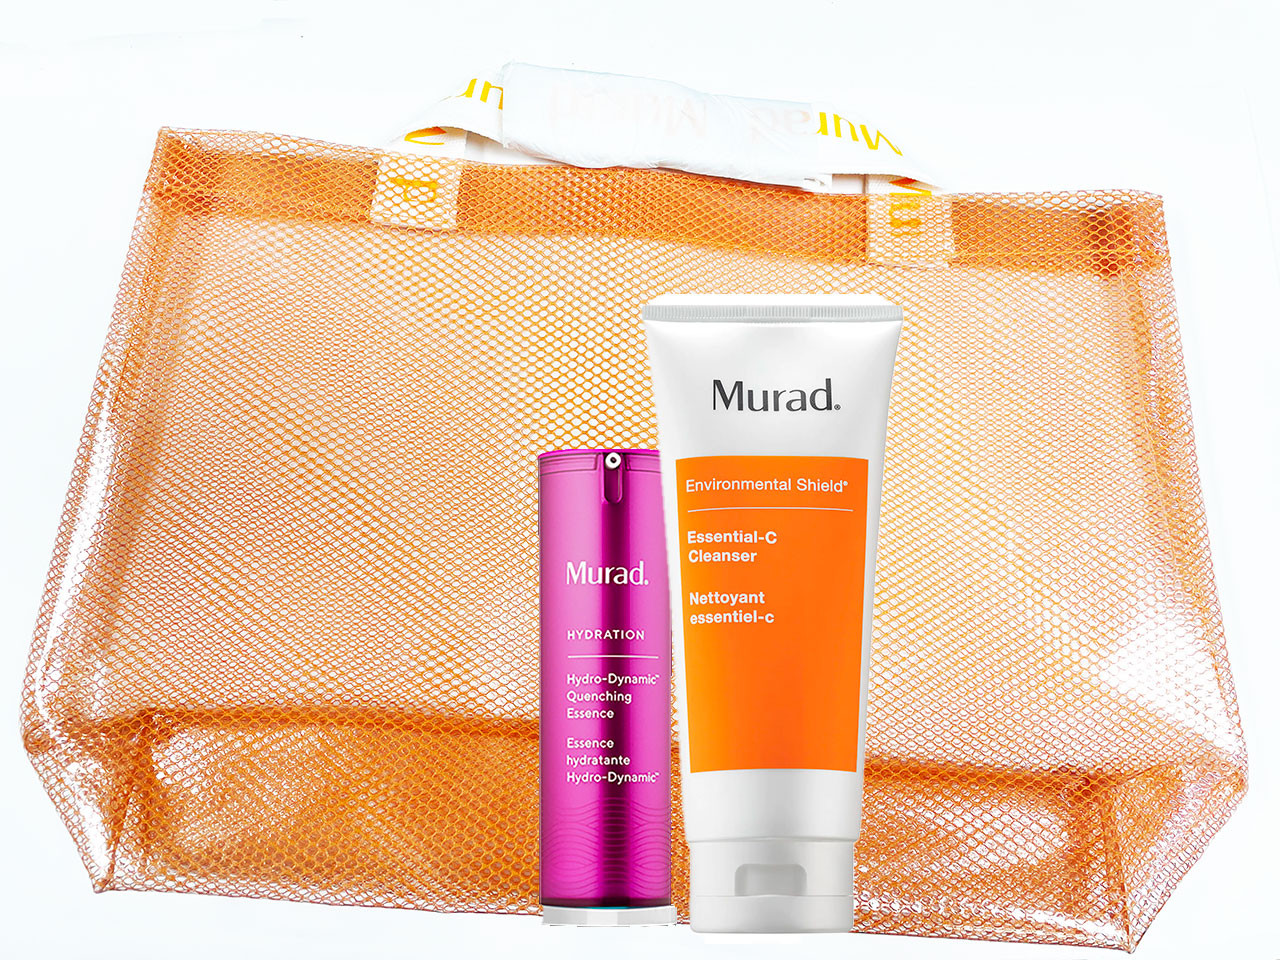 Murad Summer Essence Kit with Free Tote Bag